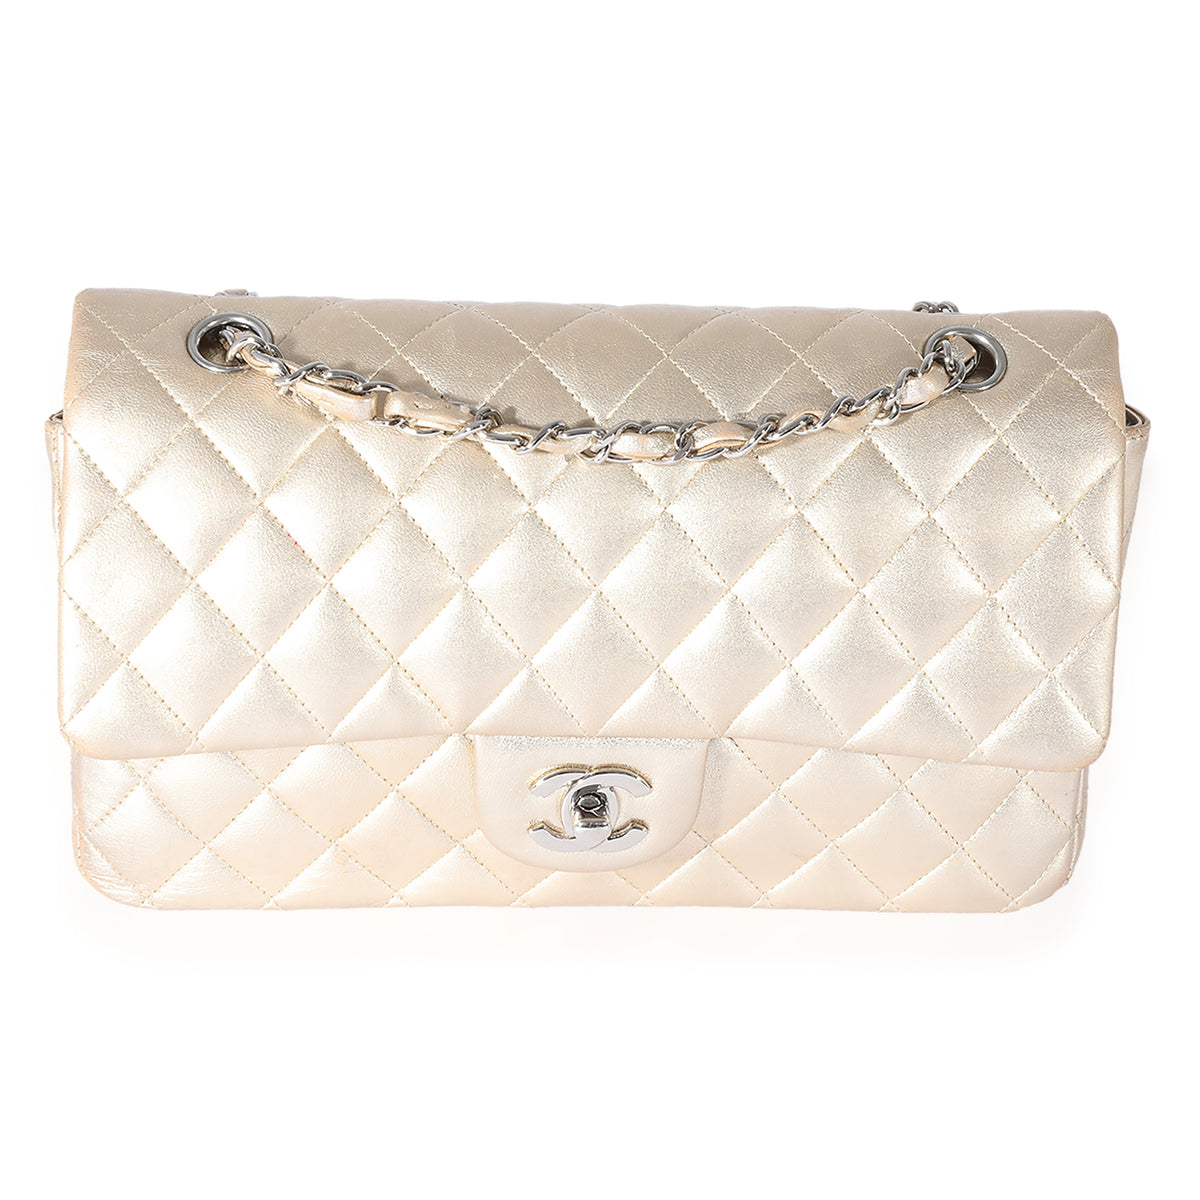 Chanel Metallic Gold Quilted Lambskin Medium Classic Double Flap